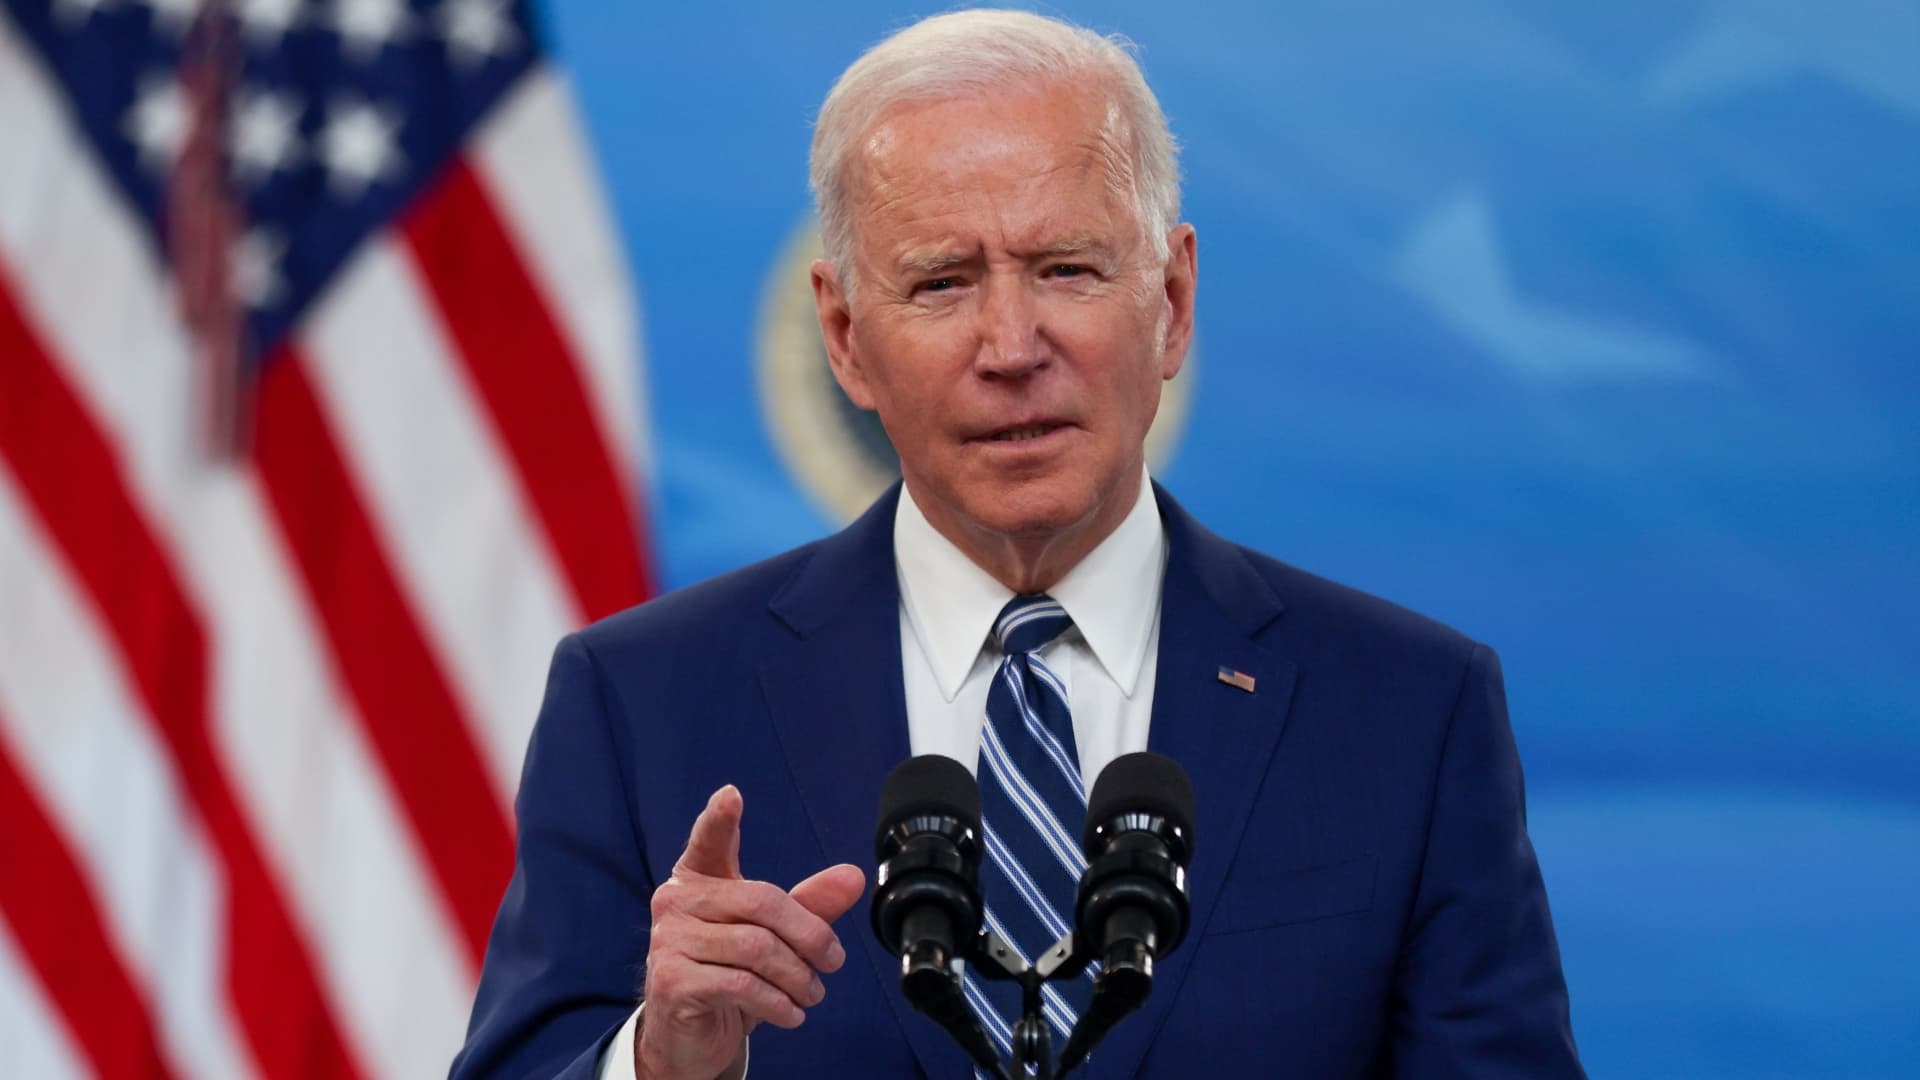 President Joe Biden delivers remarks after a meeting with his COVID-19 Response Team on the coronavirus disease (COVID-19) pandemic and the state of vaccinations, on the White House campus in Washington, U.S., March 29, 2021.